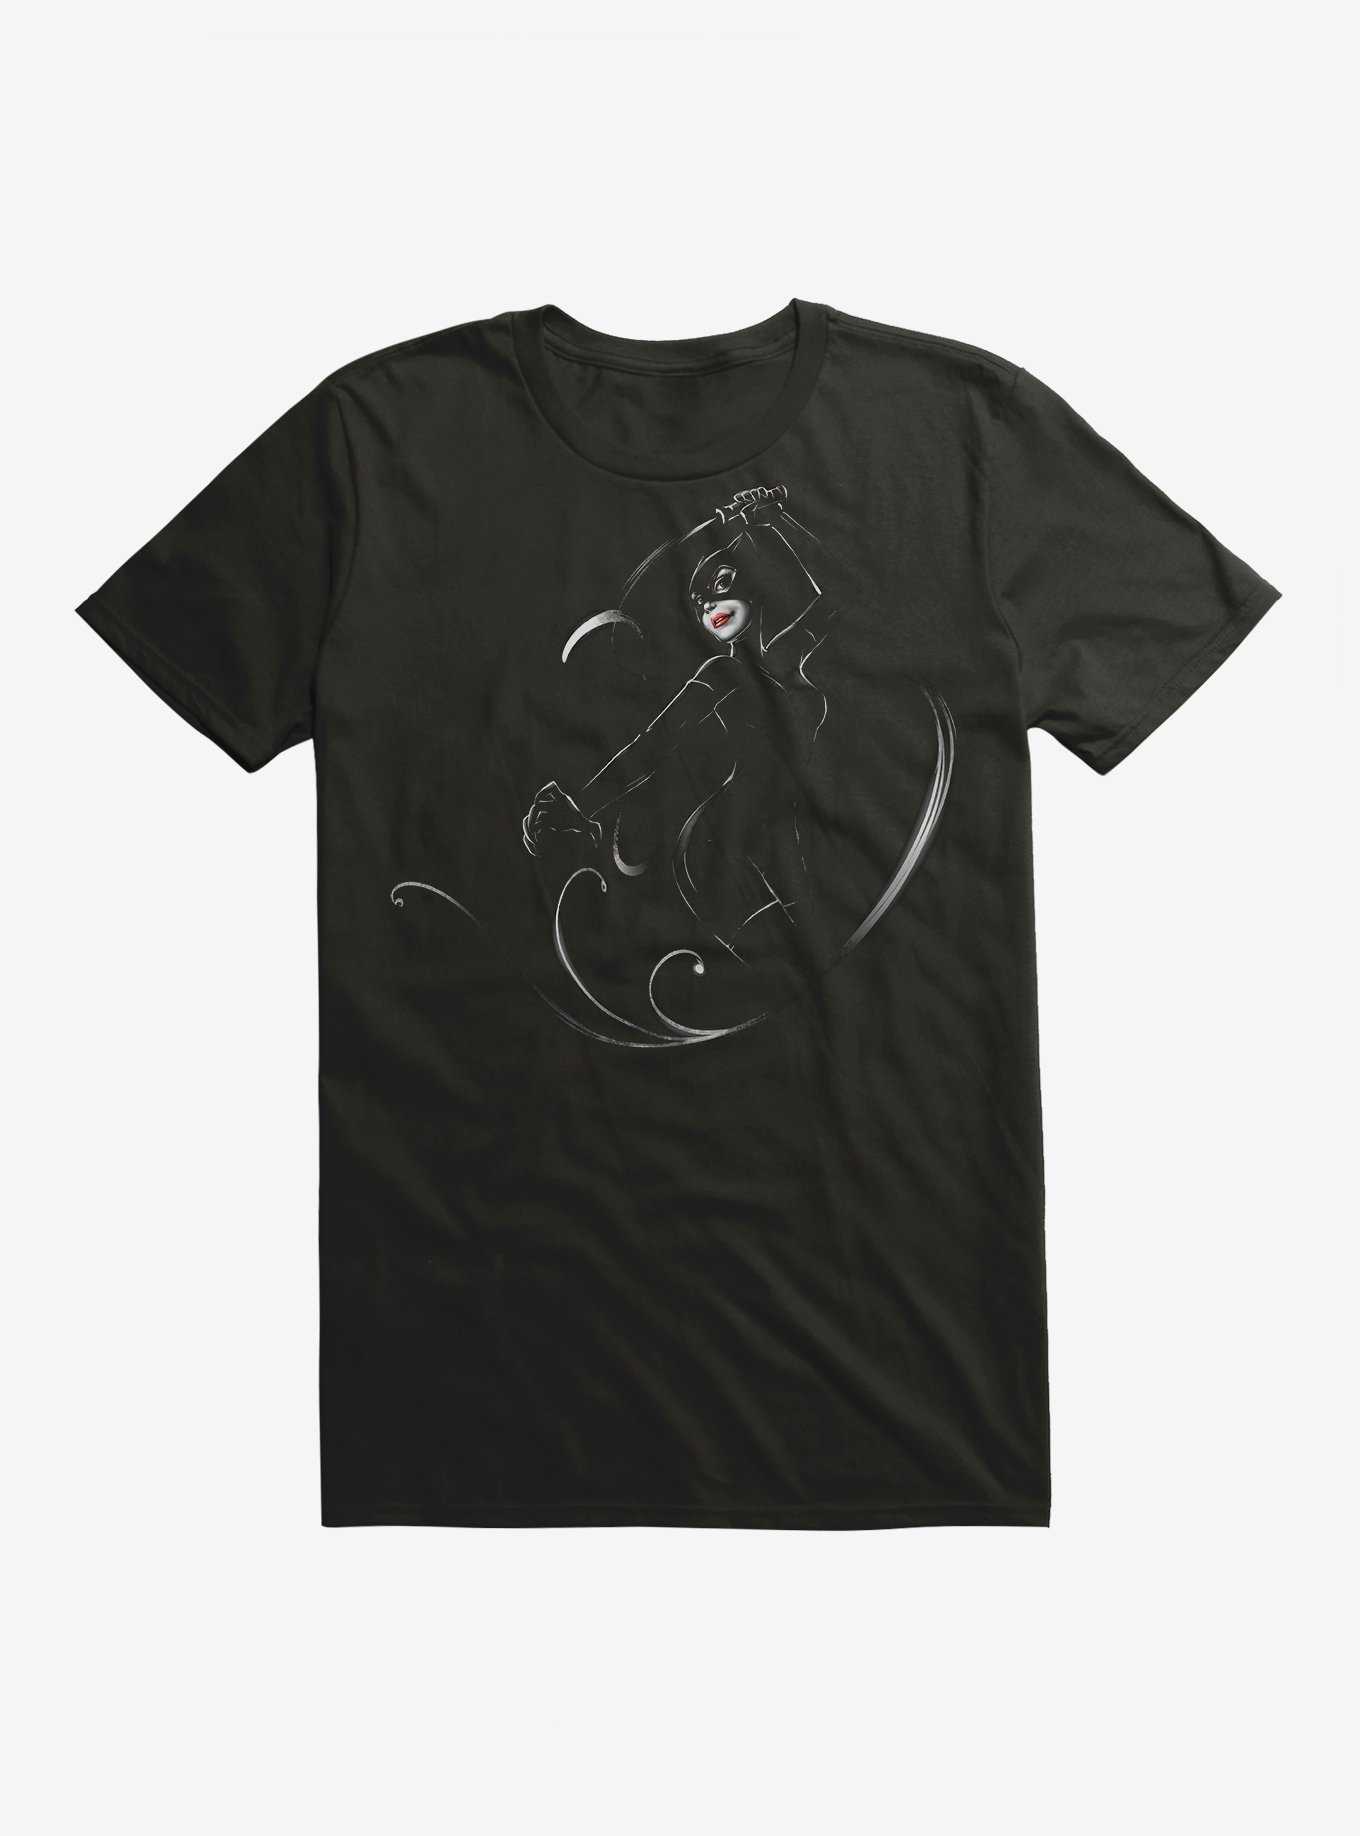 DC Comics Catwoman With Whip T-Shirt, , hi-res